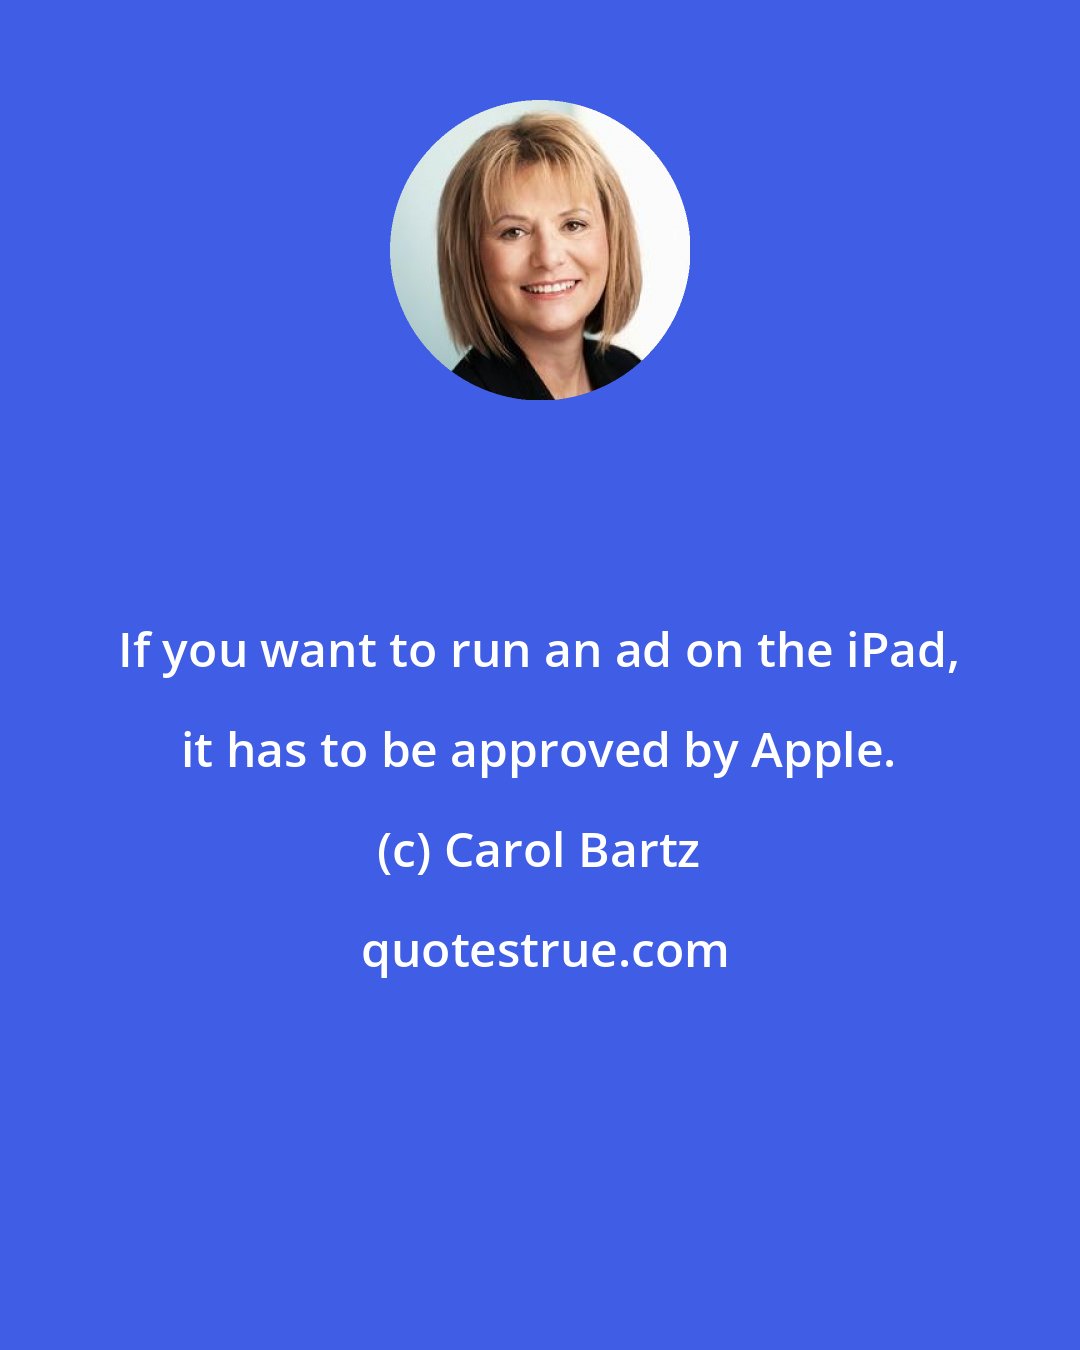 Carol Bartz: If you want to run an ad on the iPad, it has to be approved by Apple.